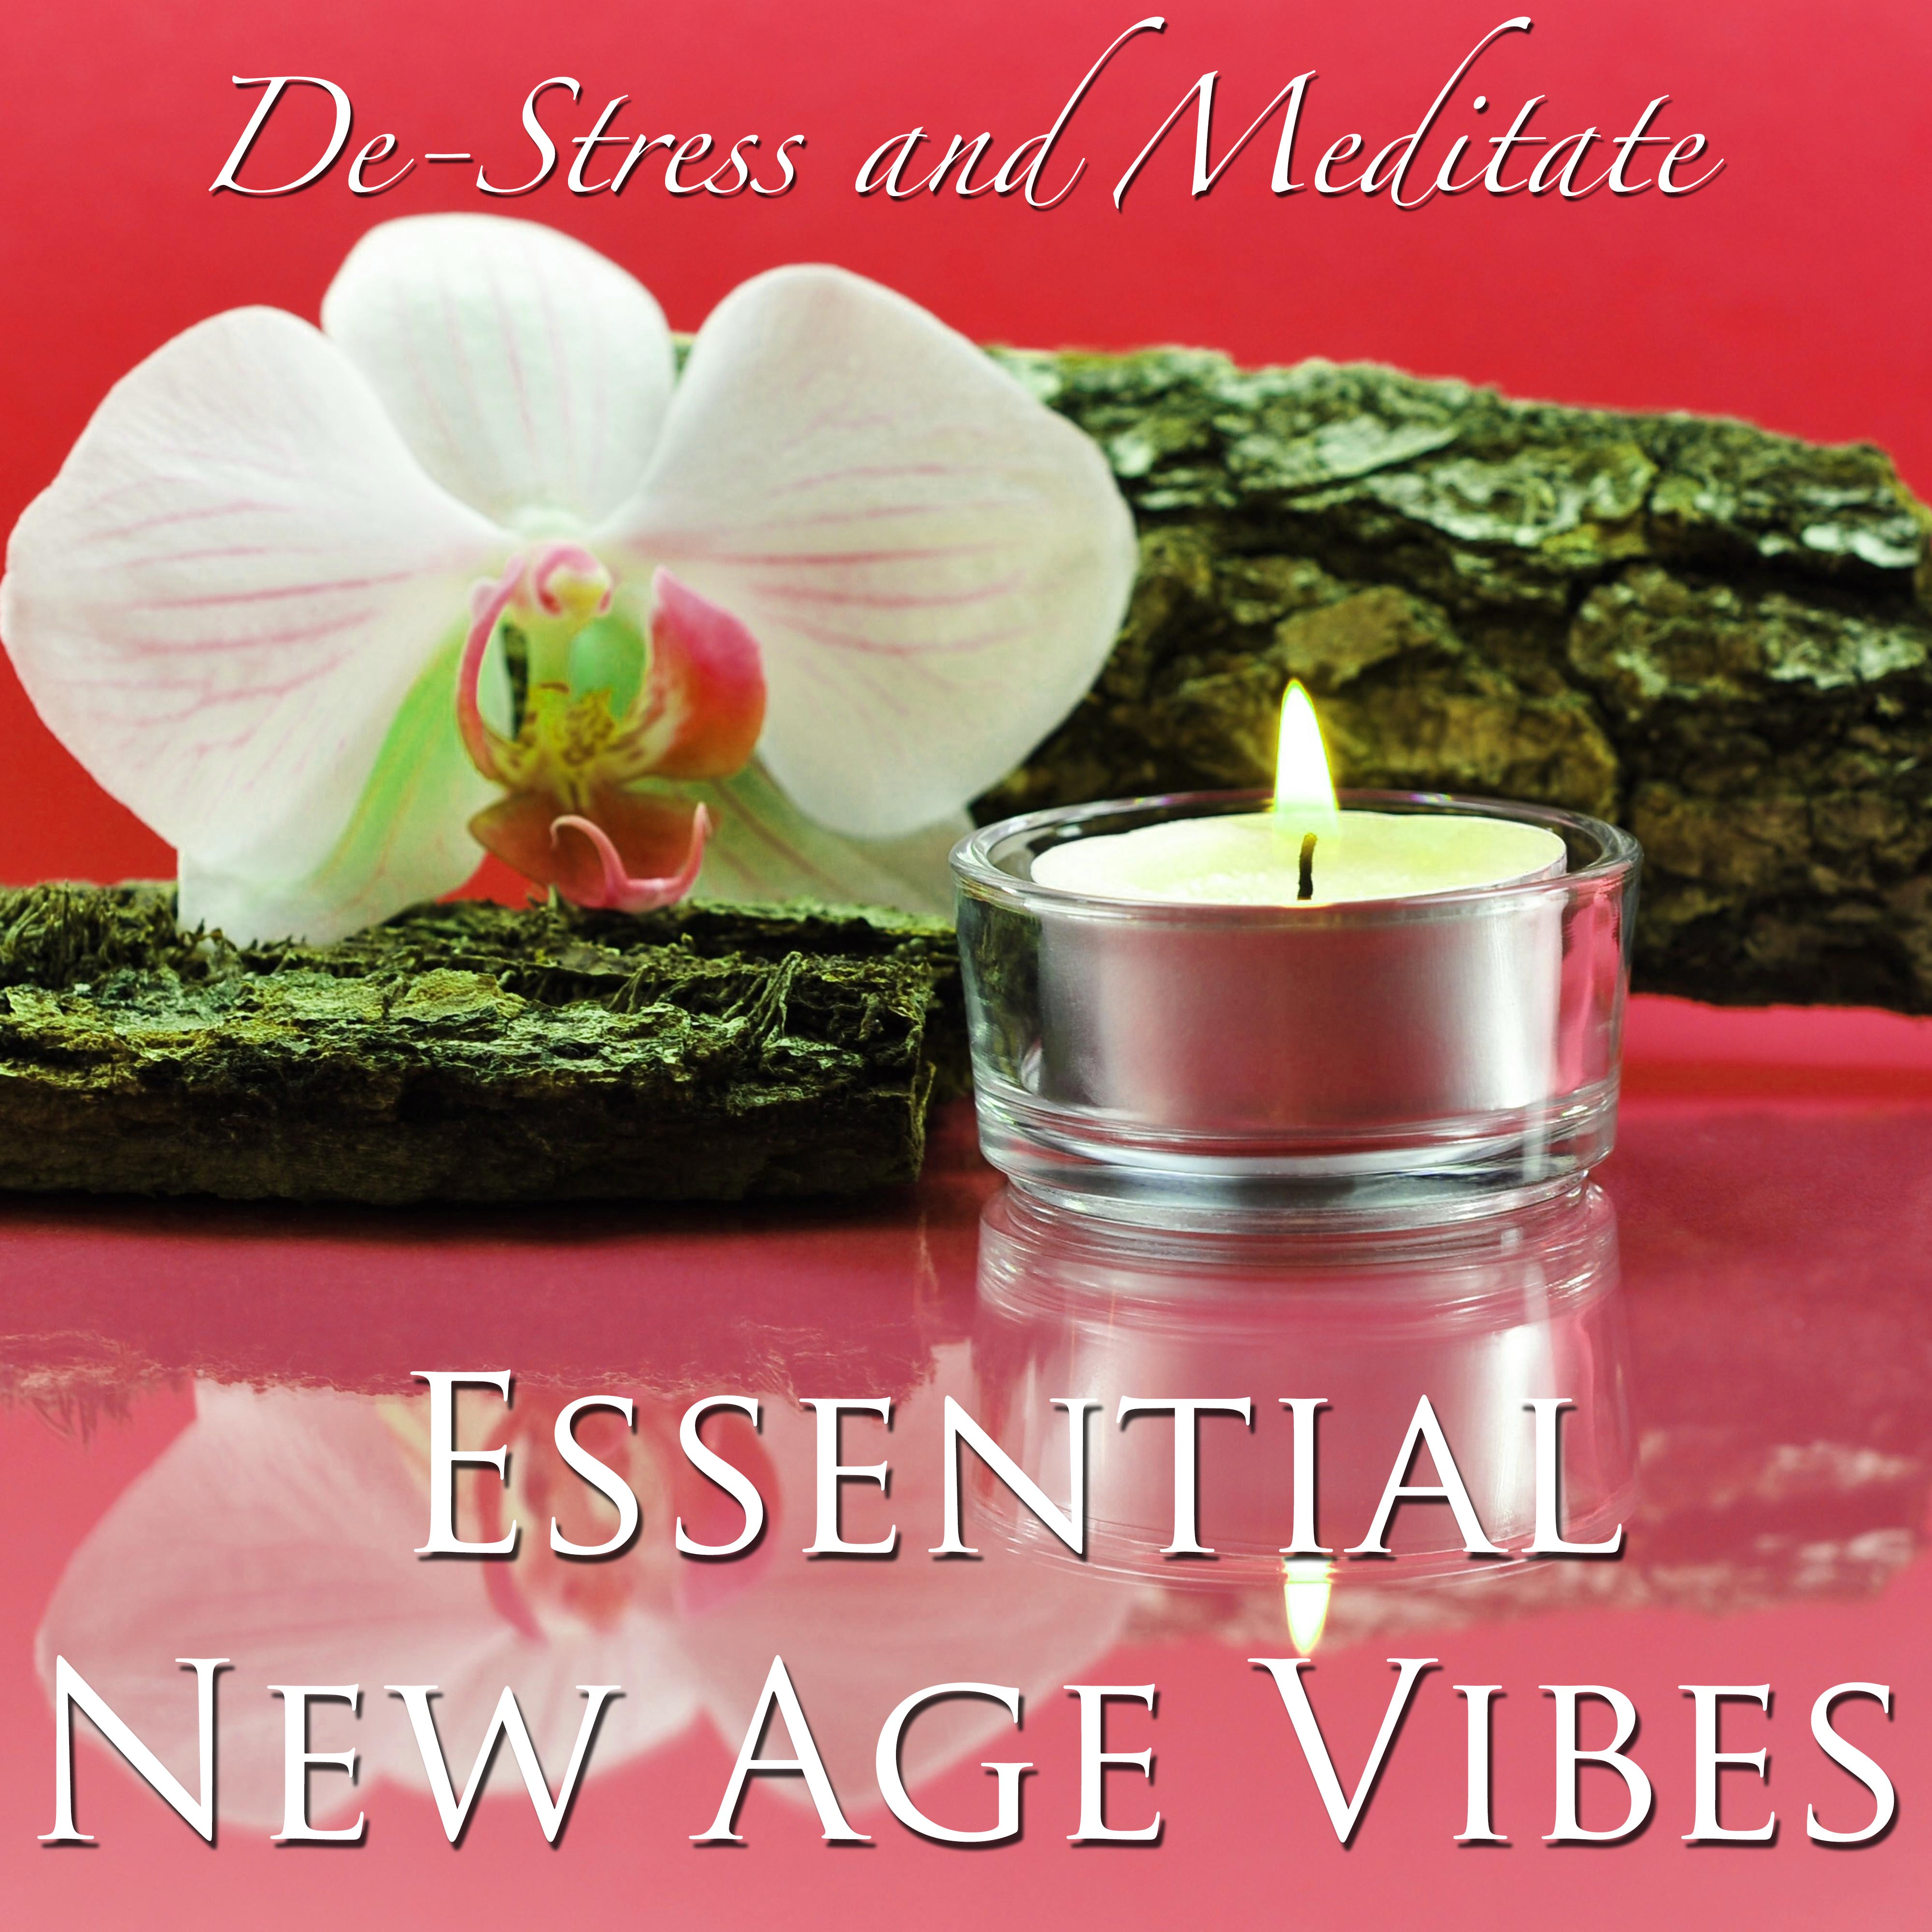 De-Stress and Meditate: Essential New Age Vibes with Soft Soothing Music with Nature Sounds